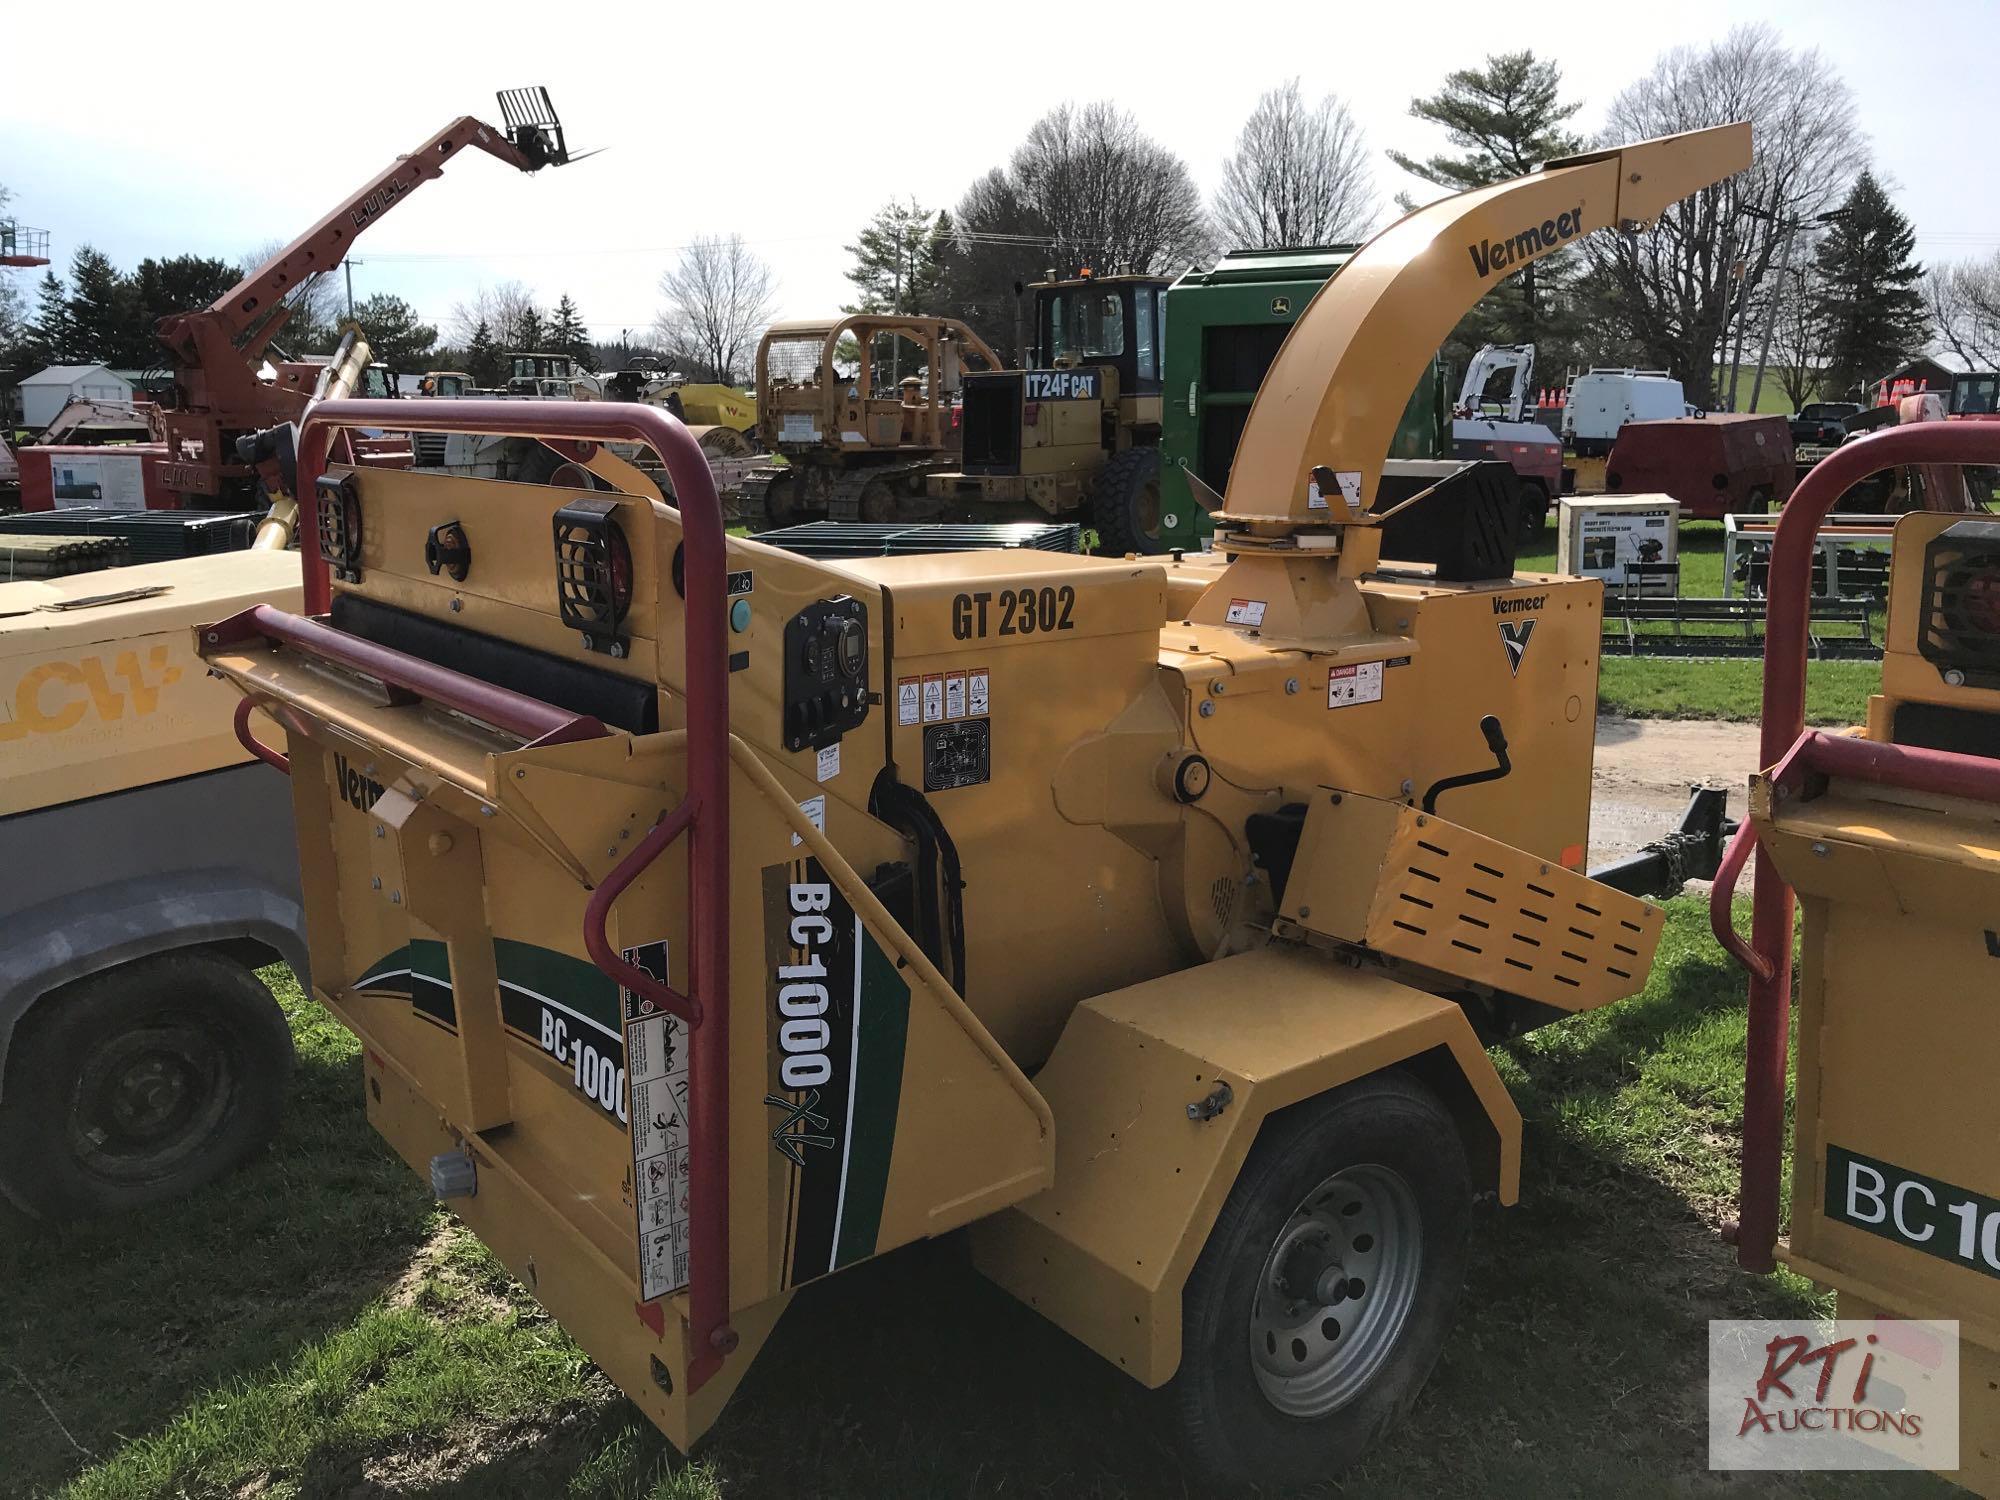 Vermeer BC1000 XL power feed wood chipper, gas engine, 750 hrs